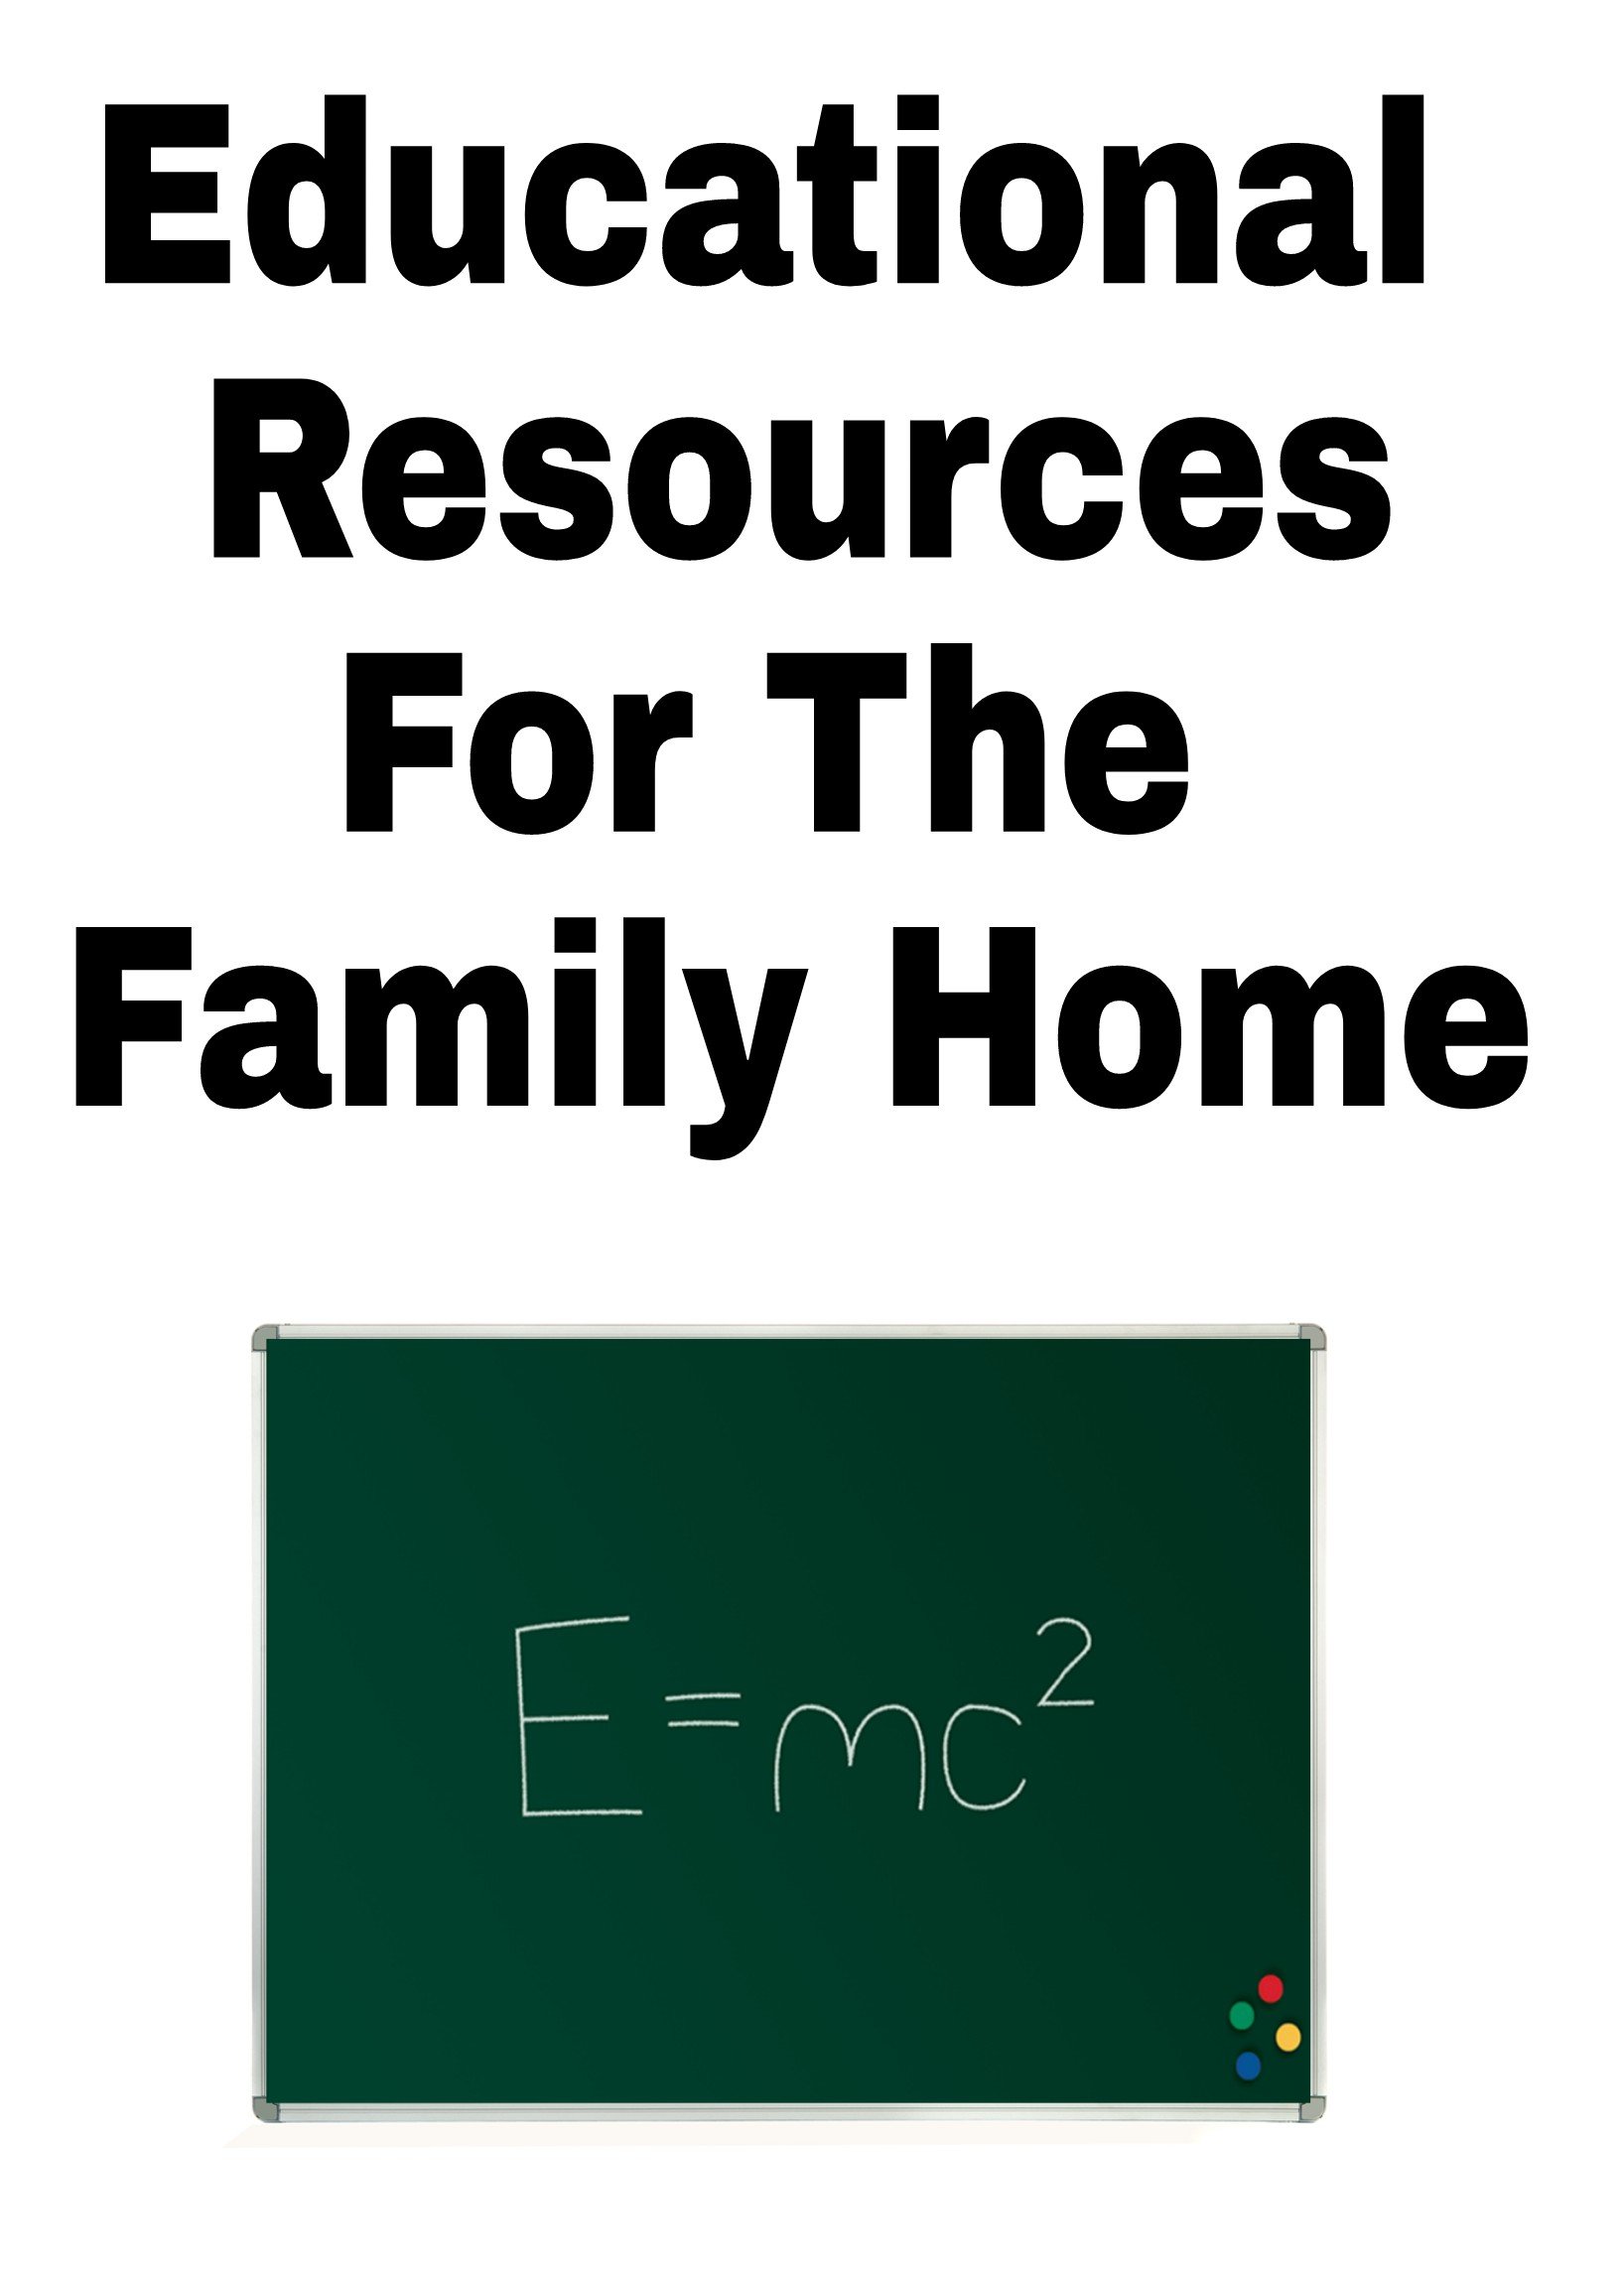 Educational Resources for the Family Home